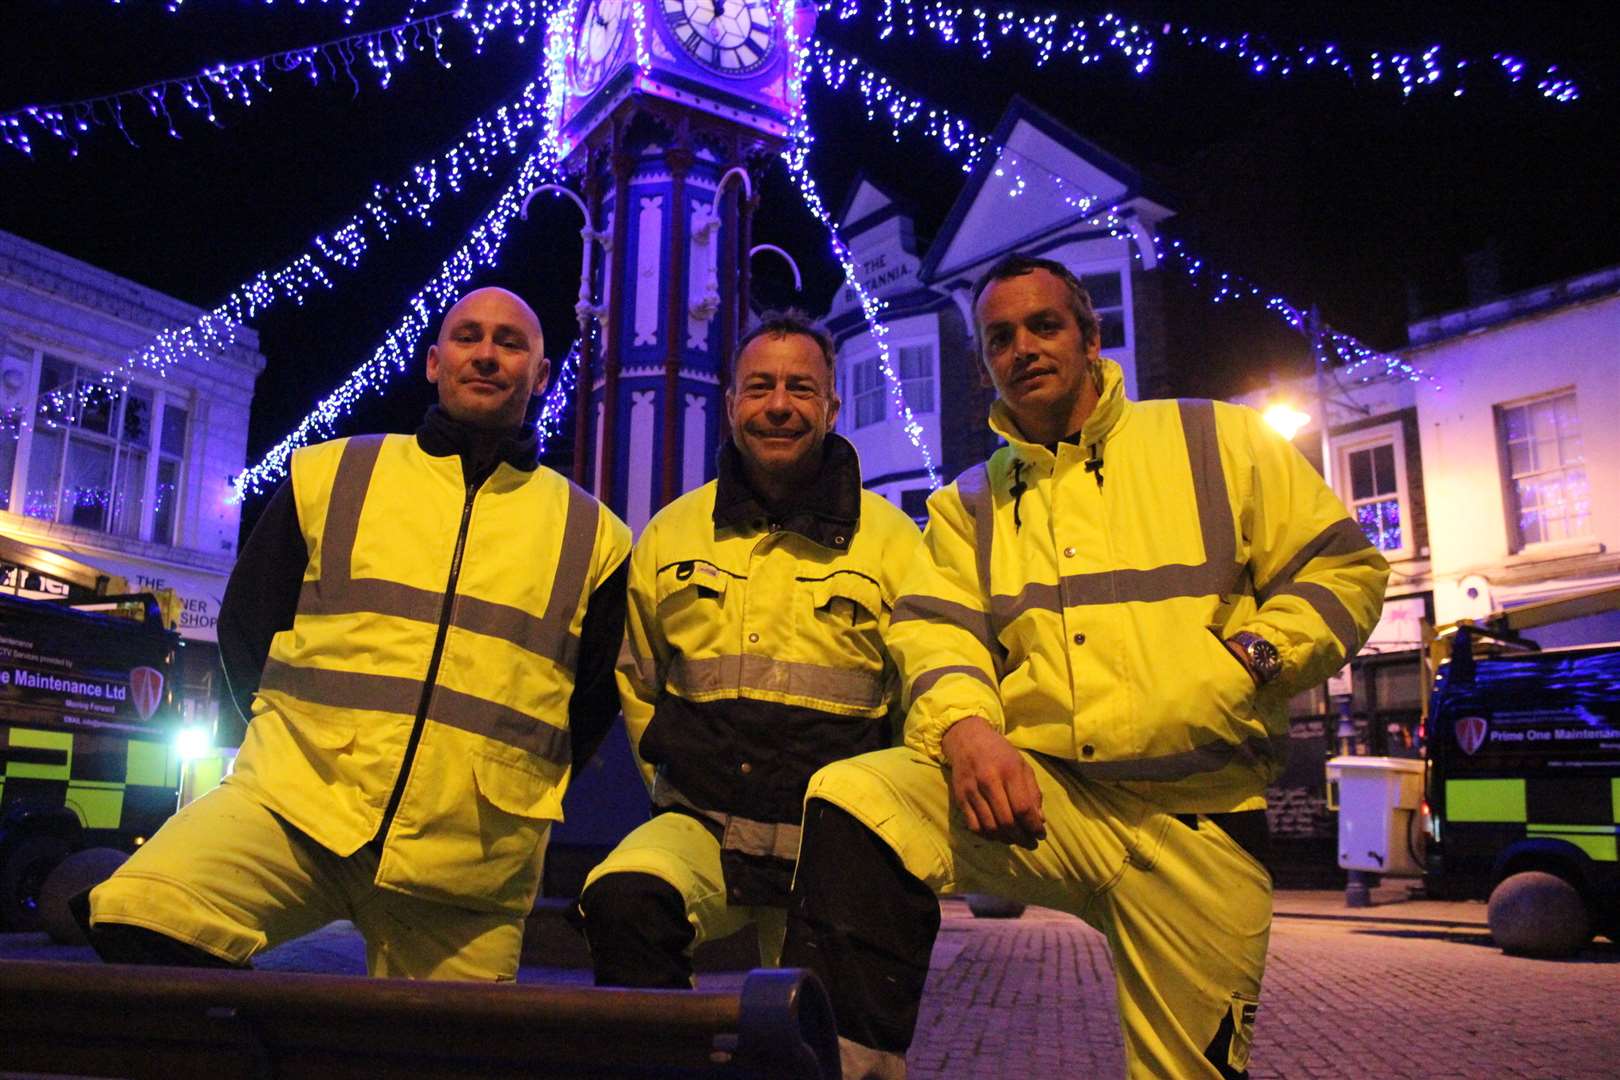 Prime One Maintenance putting up the Christmas lights in Sheerness around the clock tower. Light crew, from the left: Paul Clymer, Darren Mosdell and boss Paul Whitehead